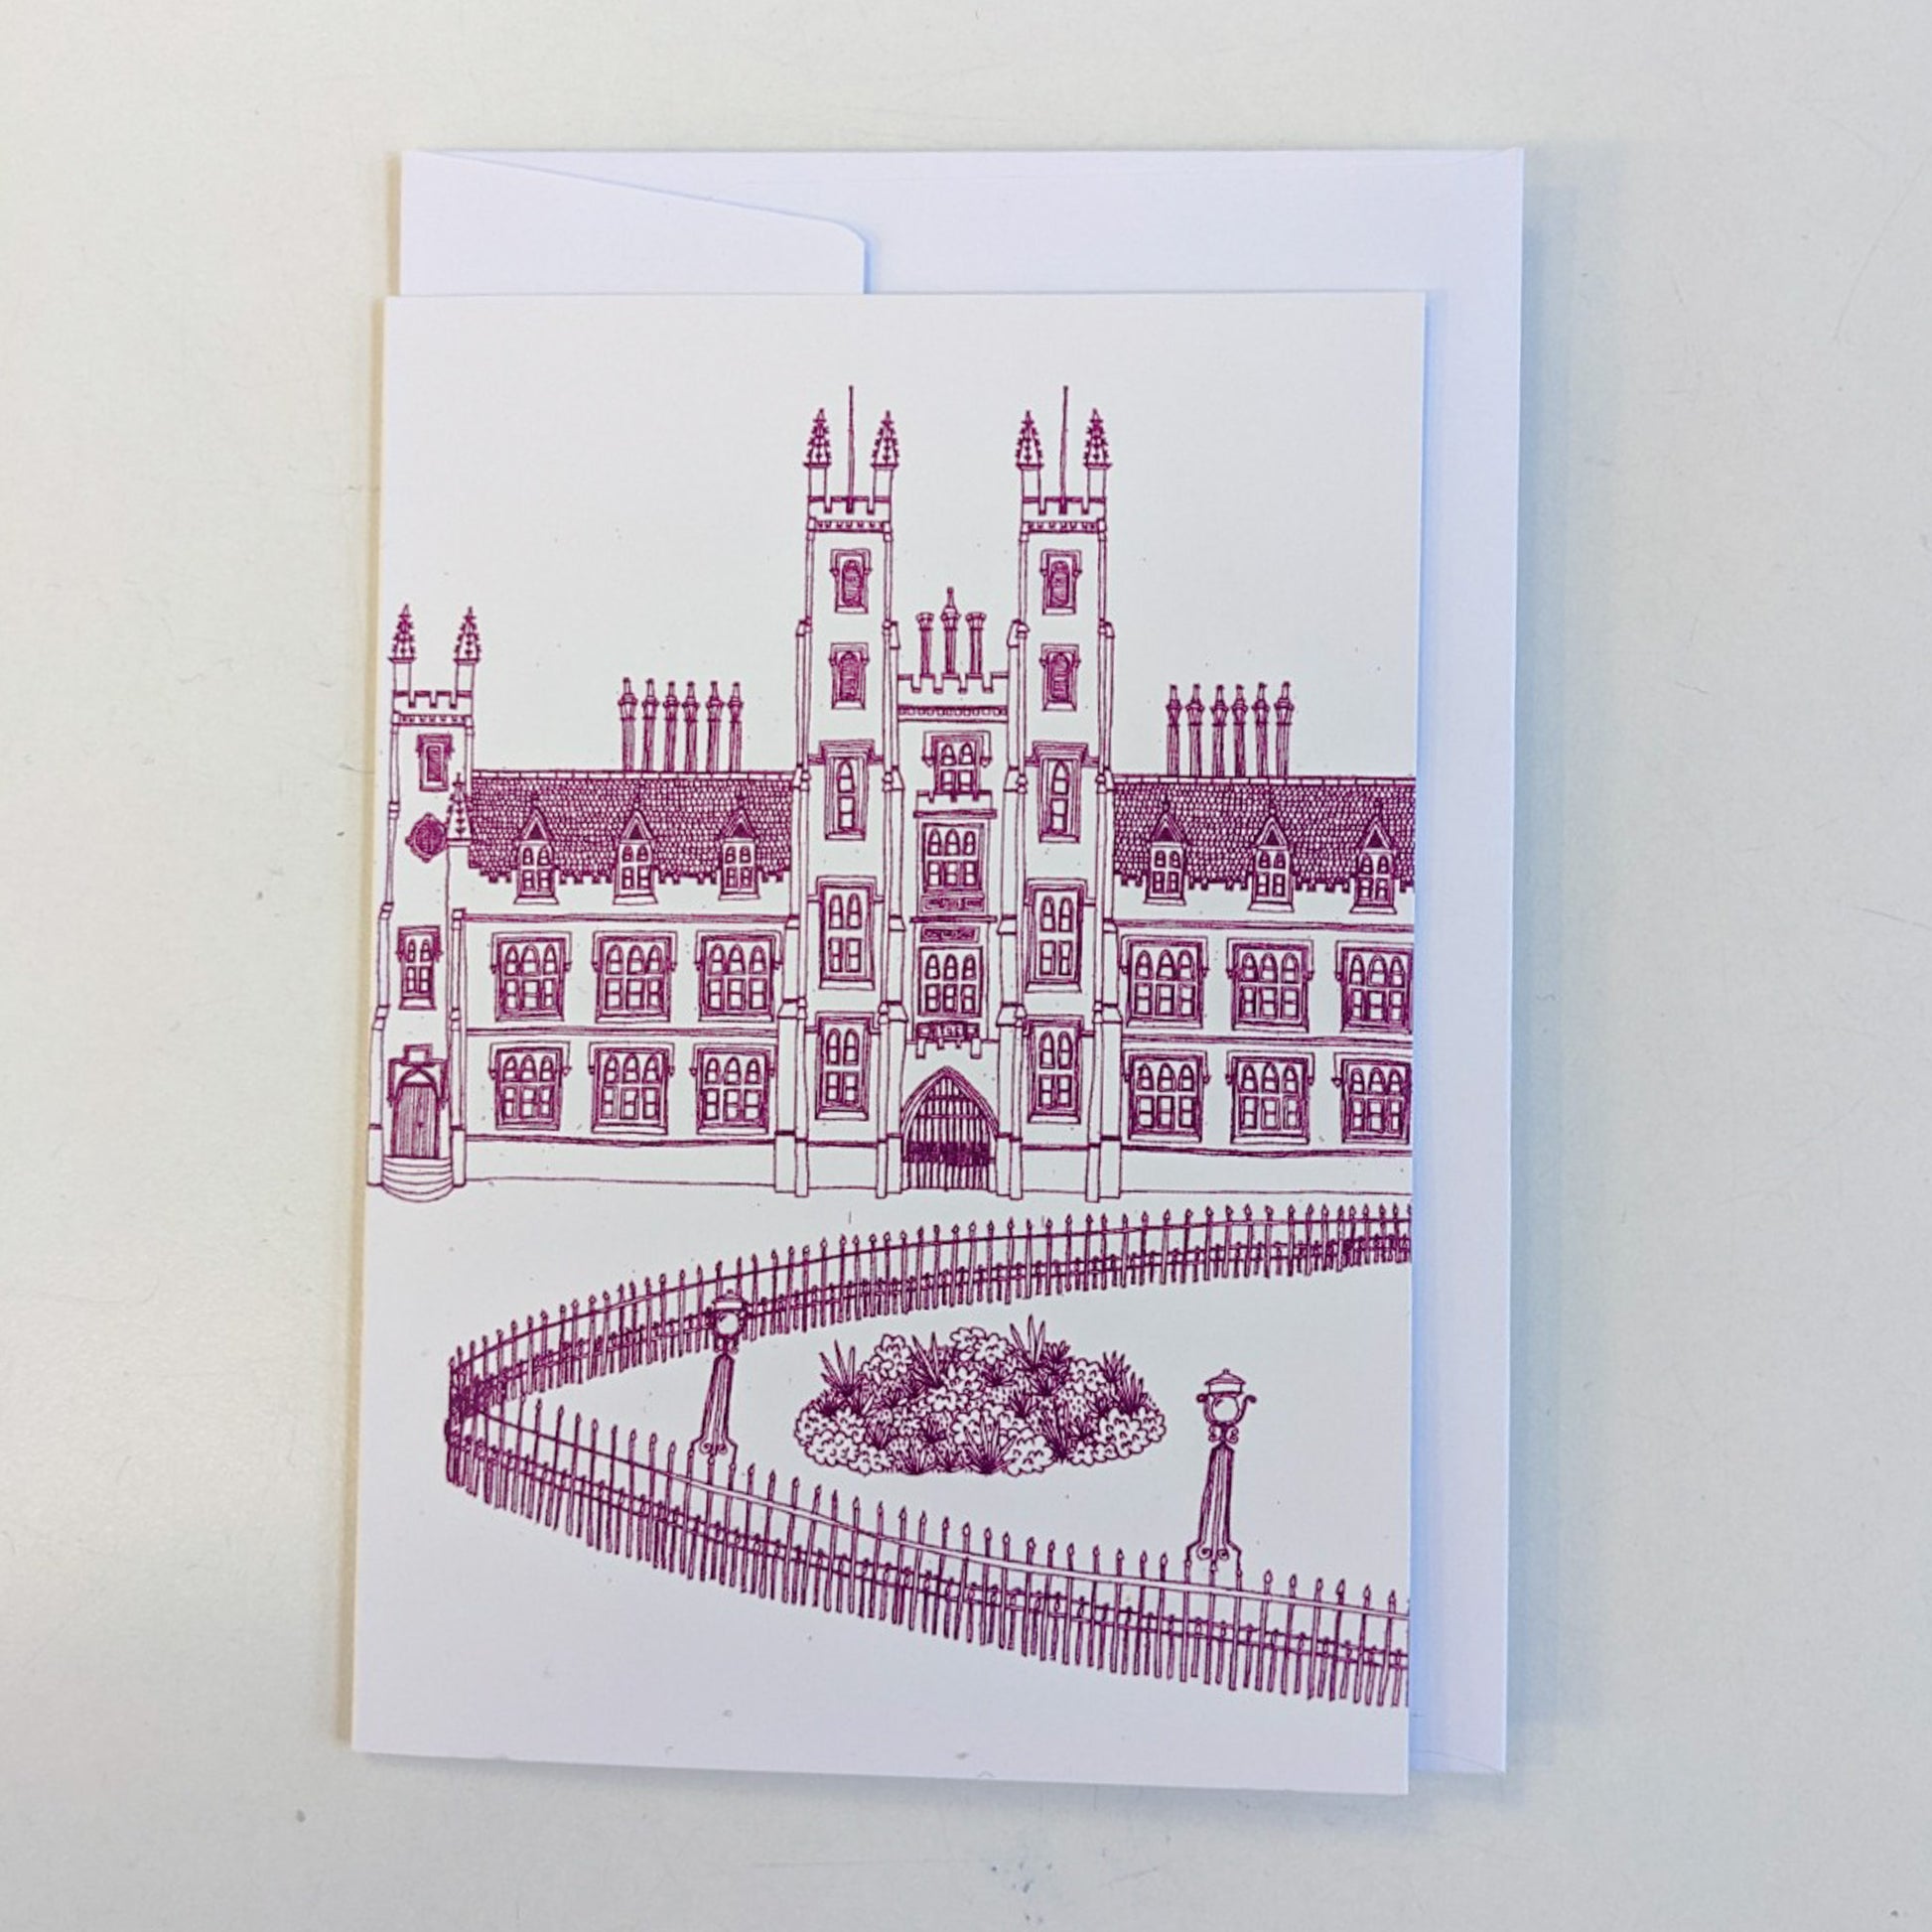 A close up of the New College illustrated greeting card.